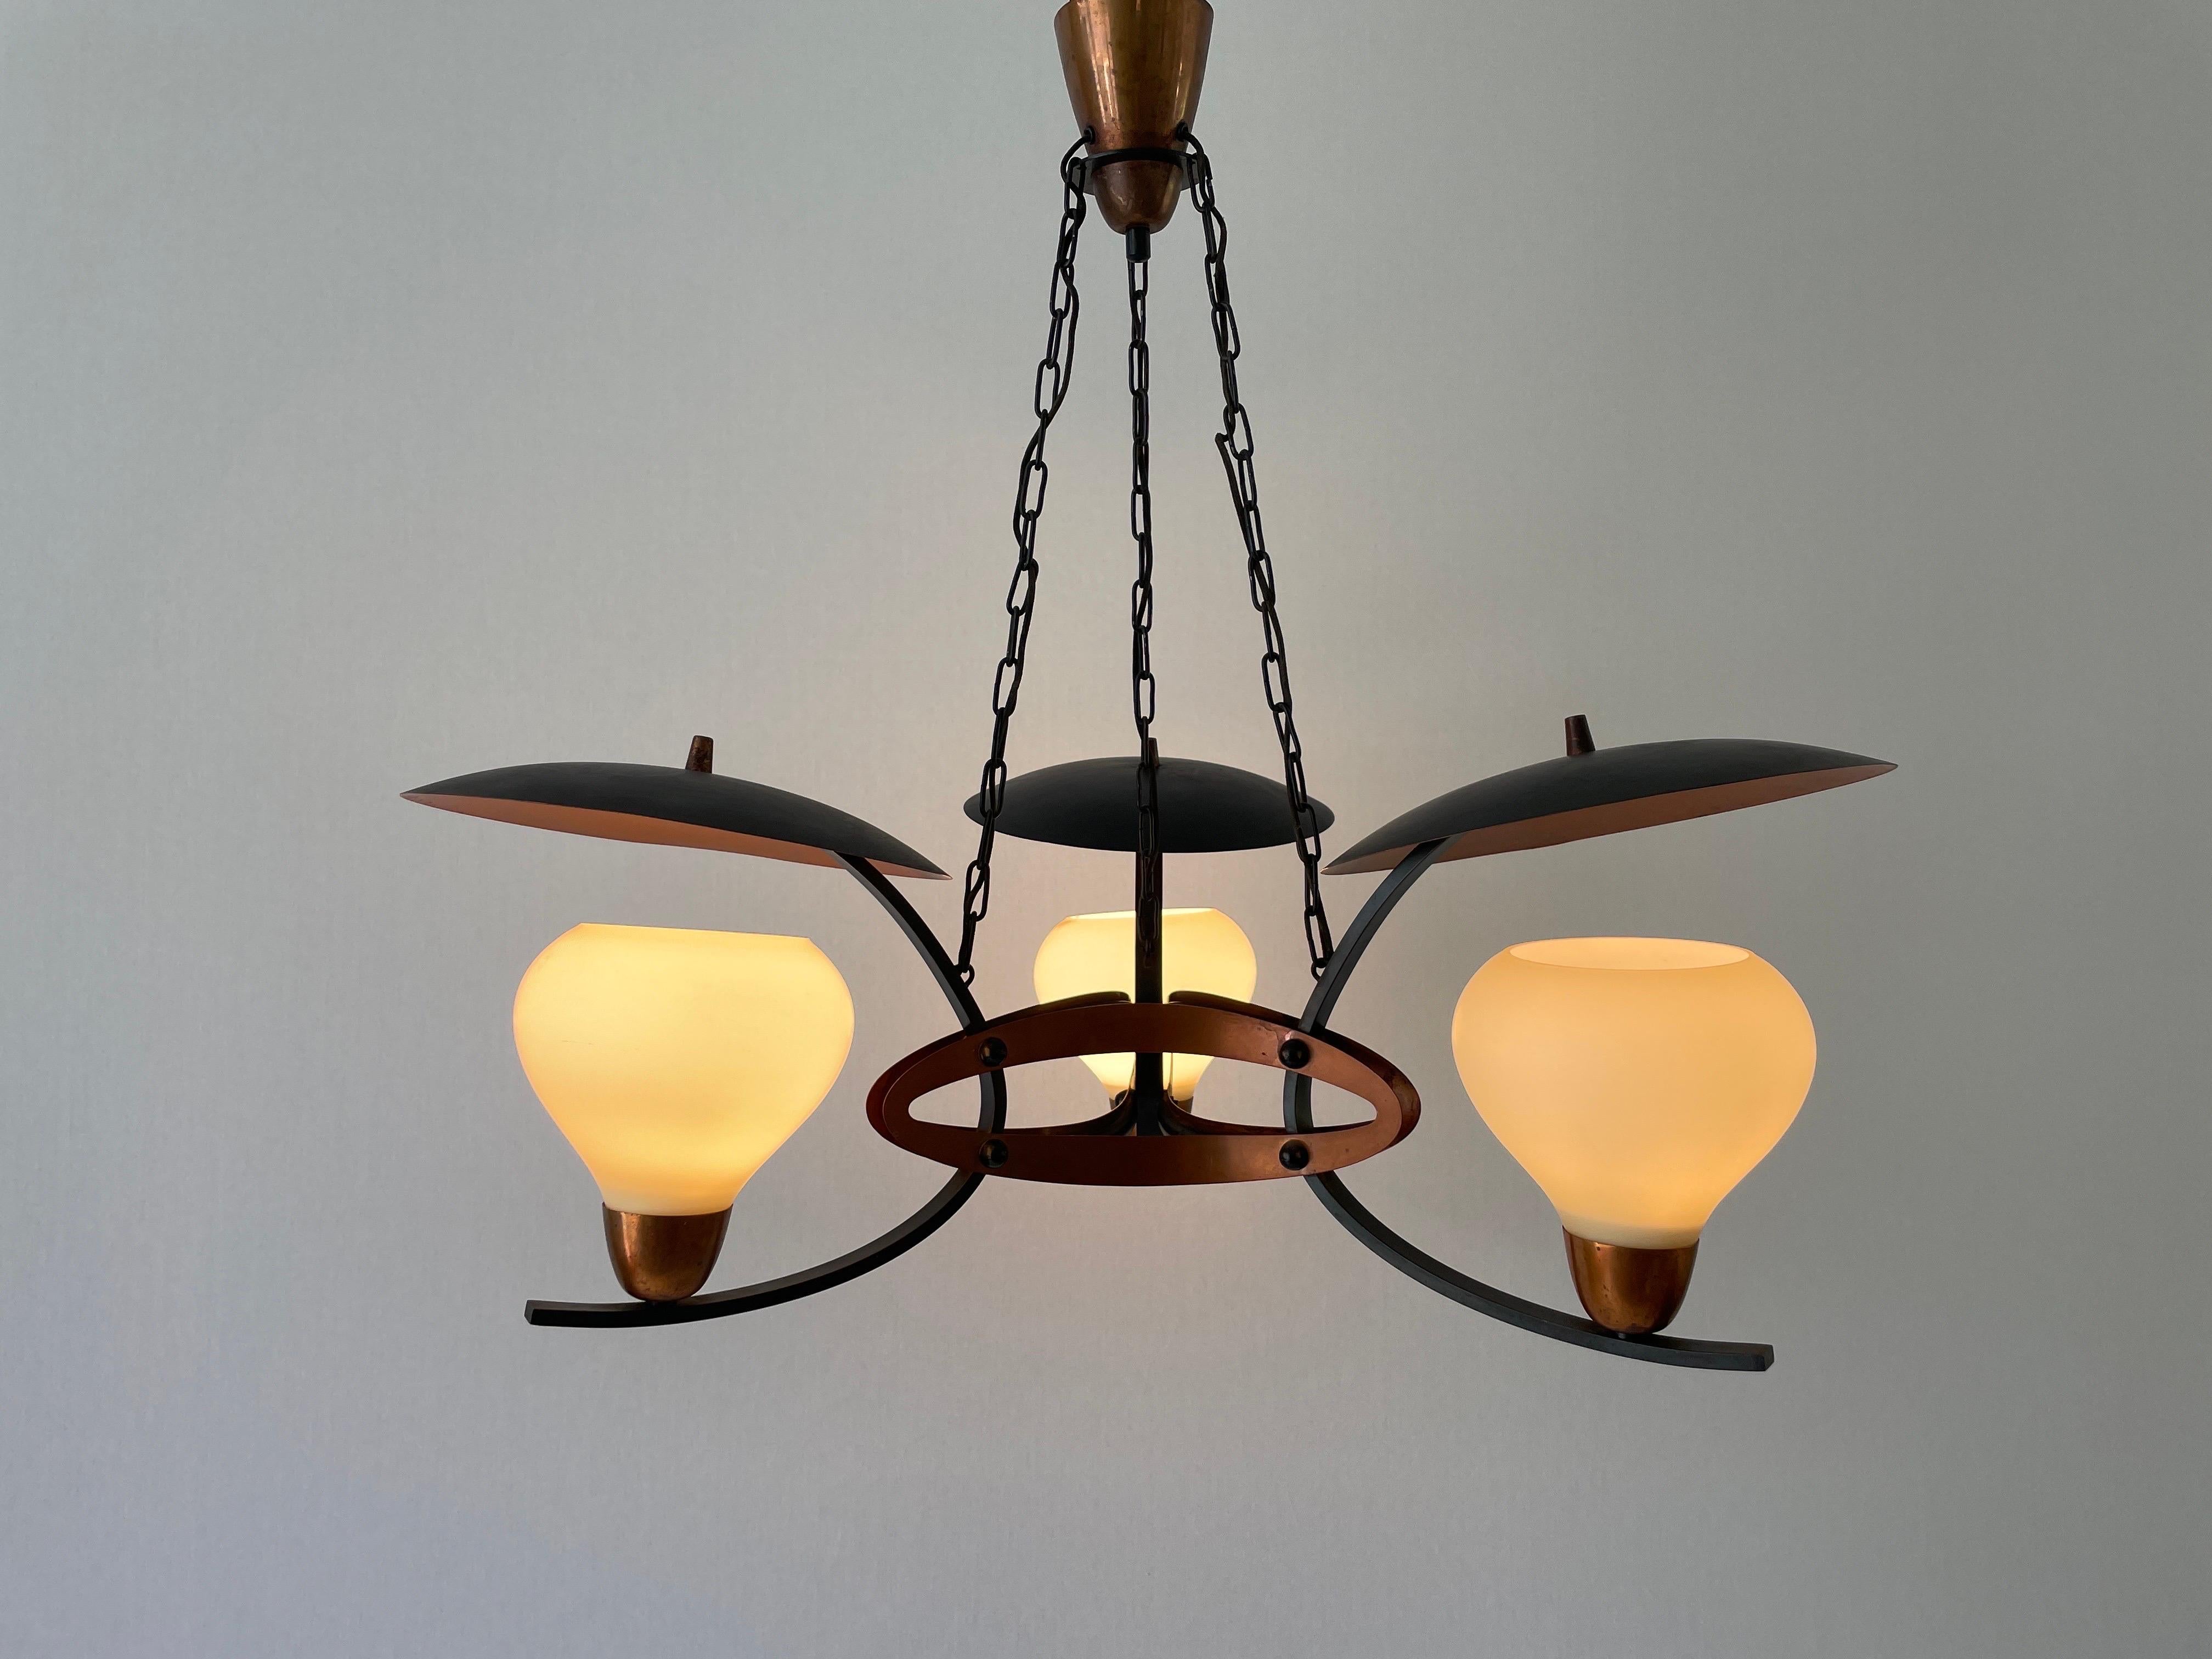 3-armed Glass and Copper Black Metal Chandelier, 1960s, Germany For Sale 4